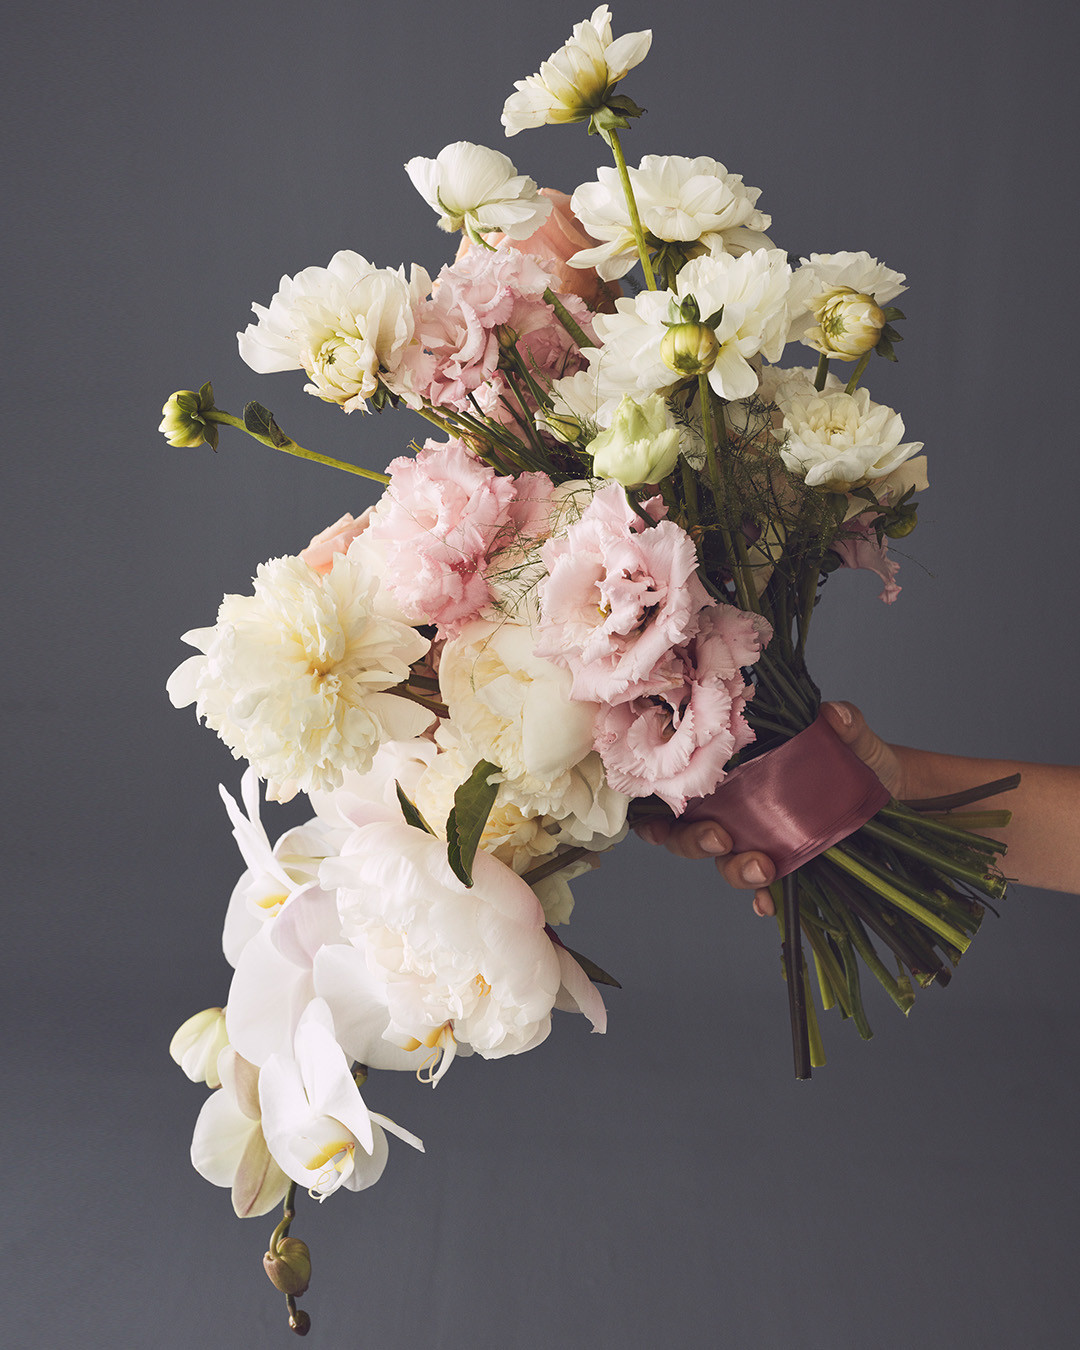 Affordable Wedding Flowers
 Affordable Wedding Flowers That Look Expensive David s